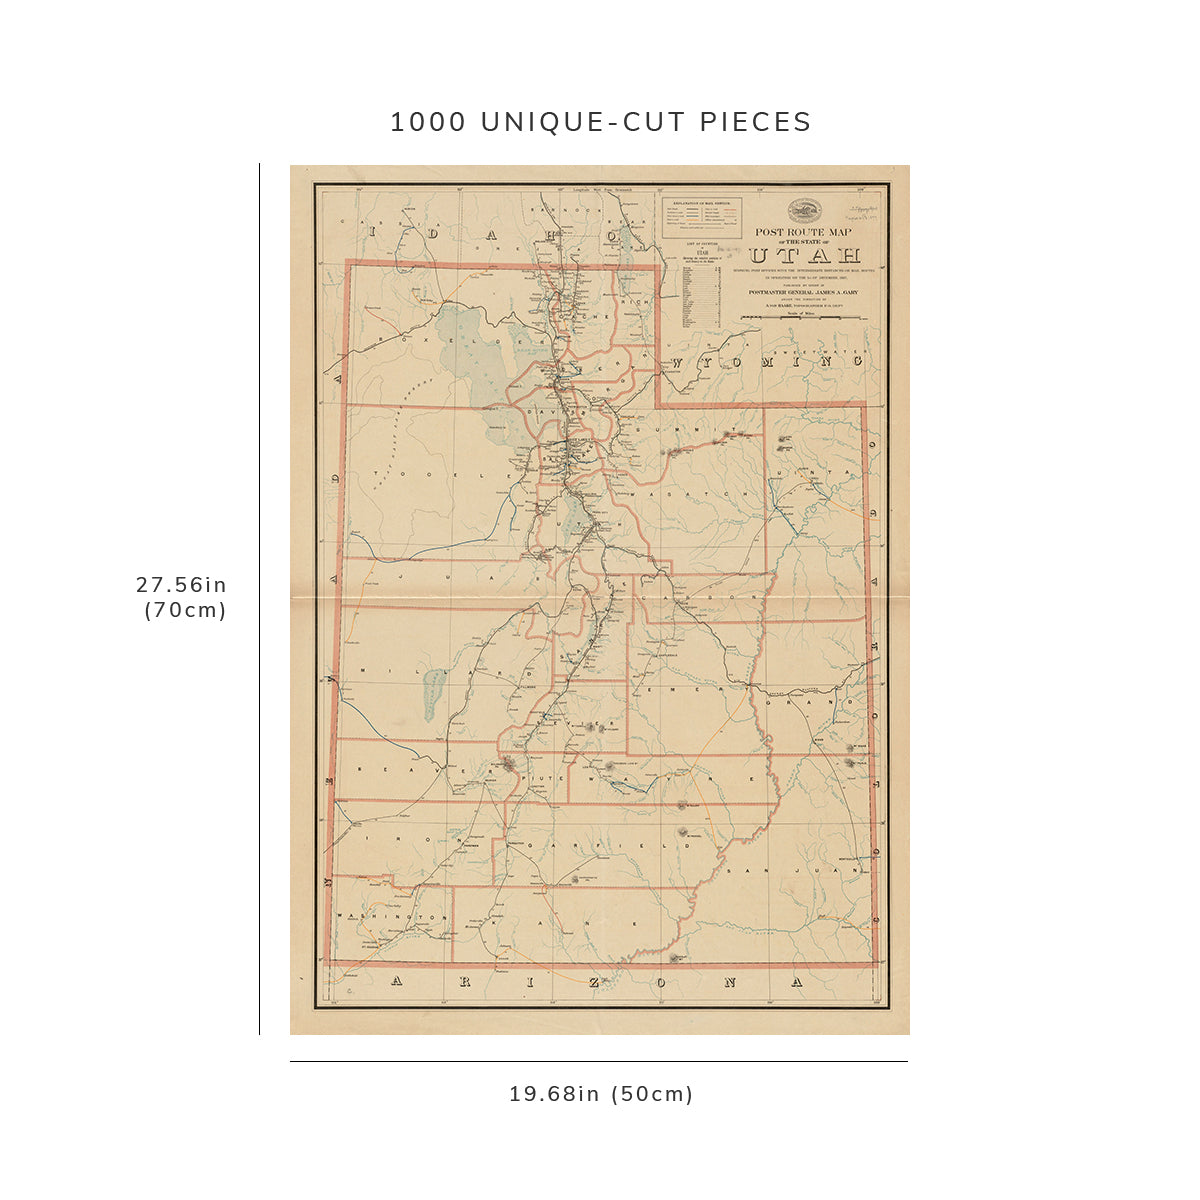 1000 Piece Jigsaw Puzzle: 1897 Map Post route of the state of Utah showing post office